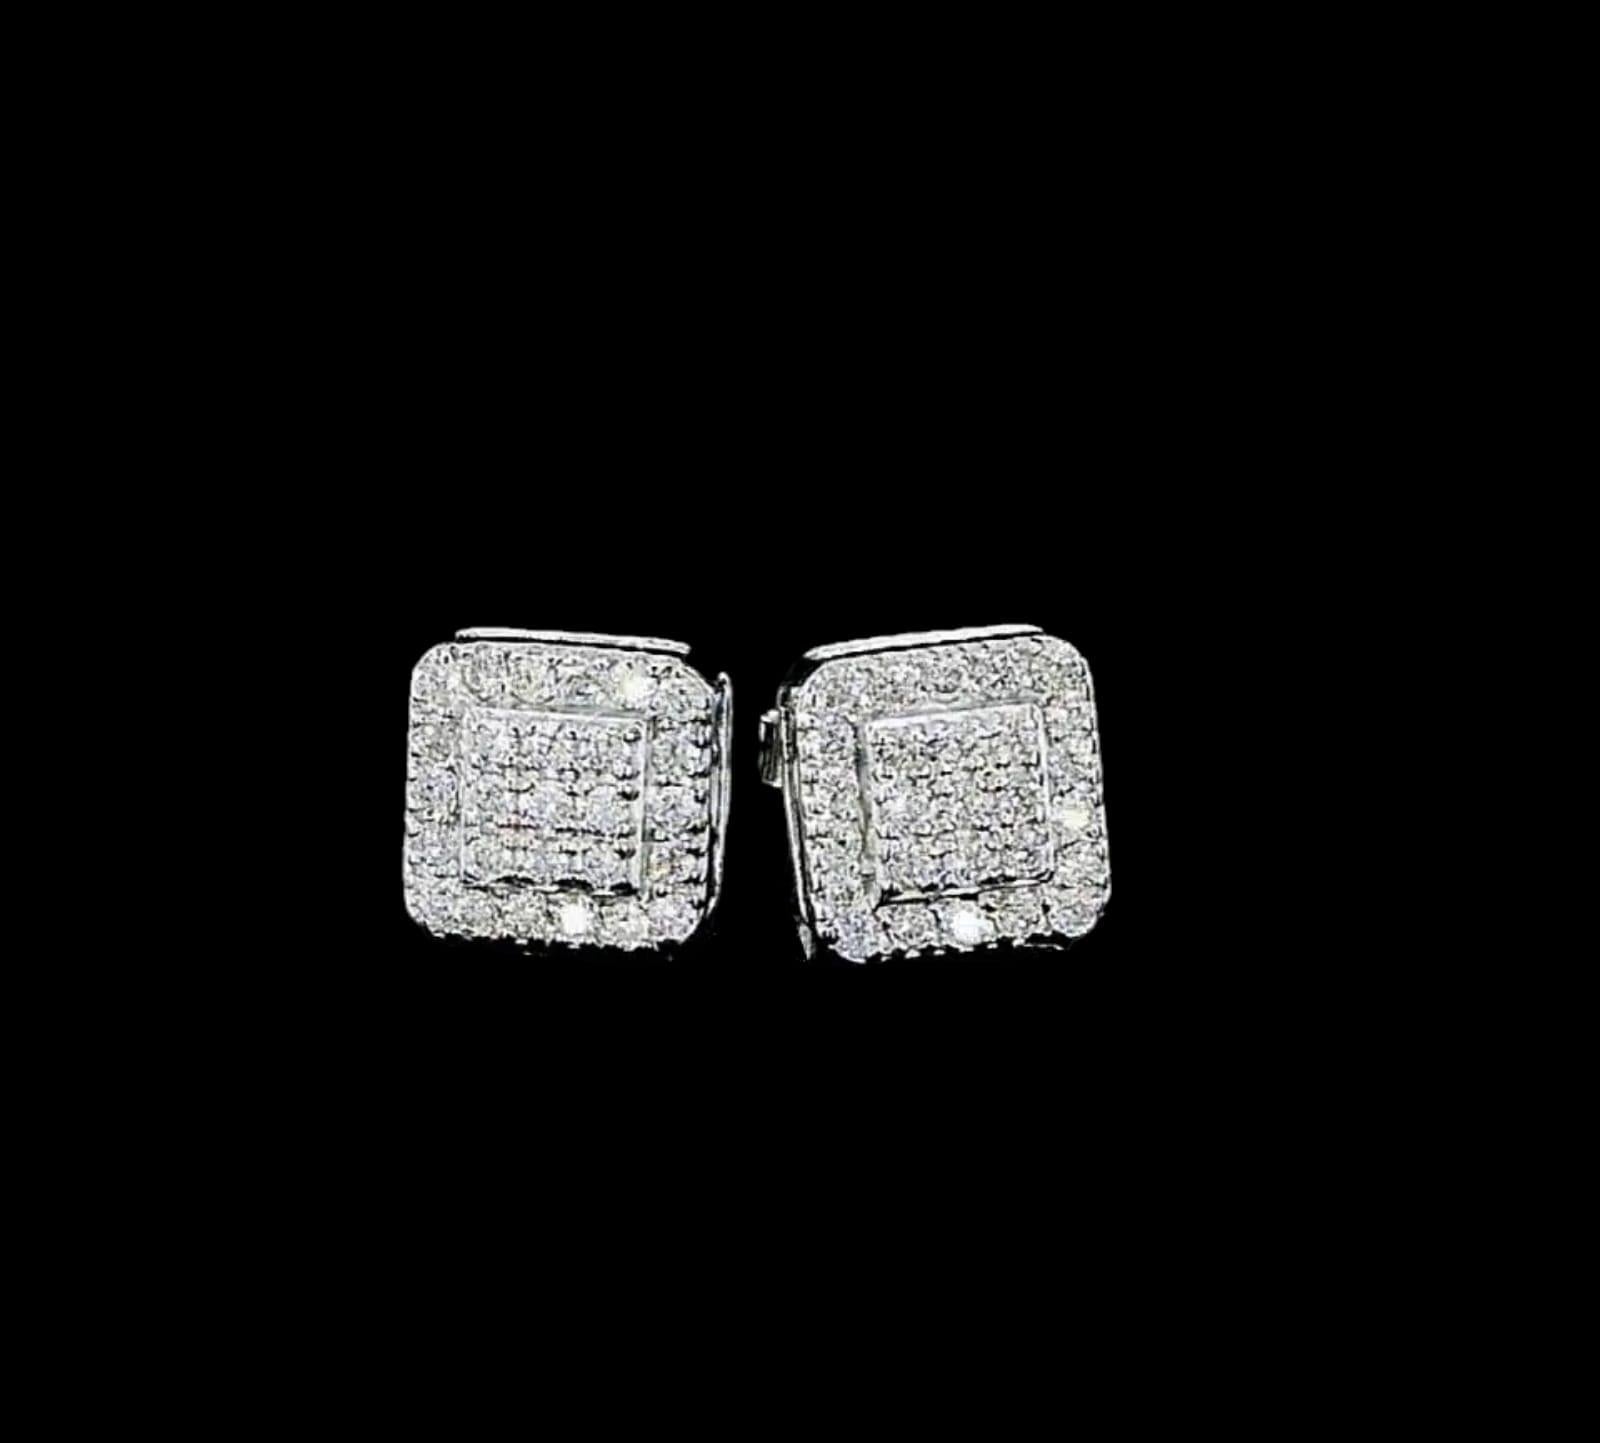 **100% NATURAL FANCY COLOUR DIAMOND JEWELRY**

✪ Jewelry Details ✪

♦ MAIN STONE DETAILS

➛ Stone Shape: round
➛ Stone Weight: 54 pcs - 0.15 cts

♦ GROSS WEIGHT: 1.94 grams

➛ Metal Type: 10k White Gold
➛ Jewelry Type: Diamond earrings, Stud